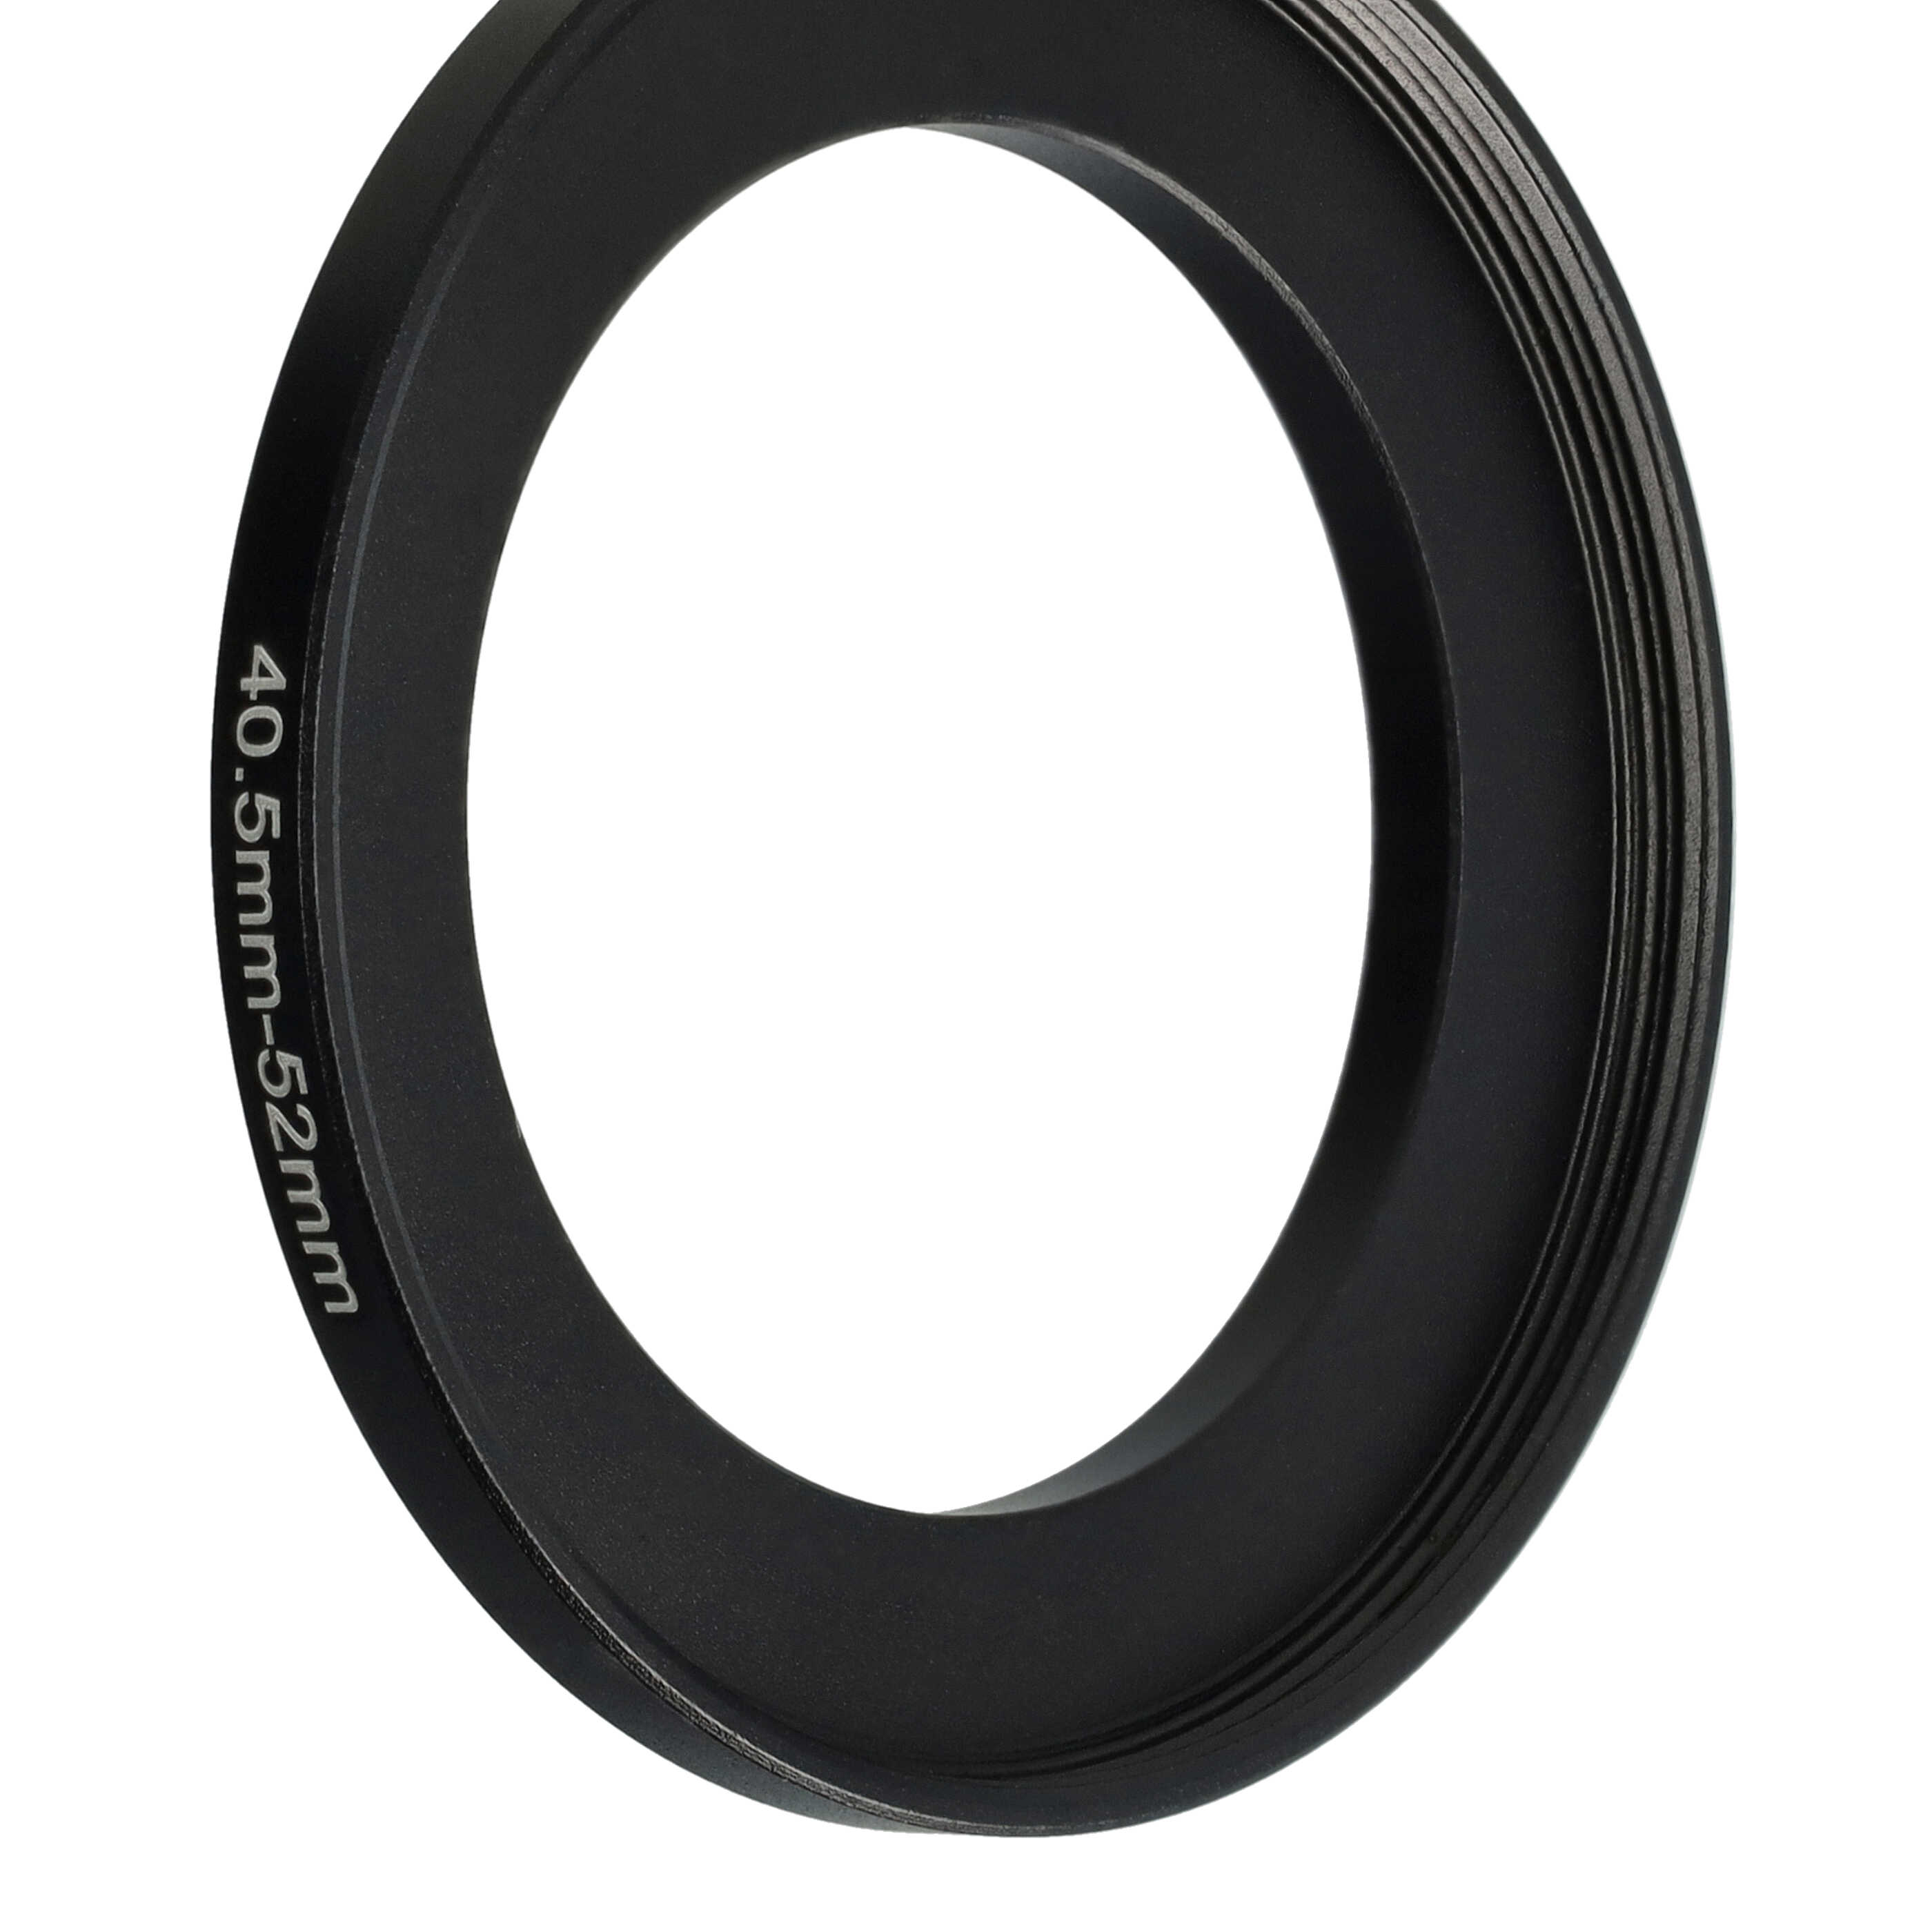 Step-Up Ring Adapter of 40.5 mm to 52 mmfor various Camera Lens - Filter Adapter